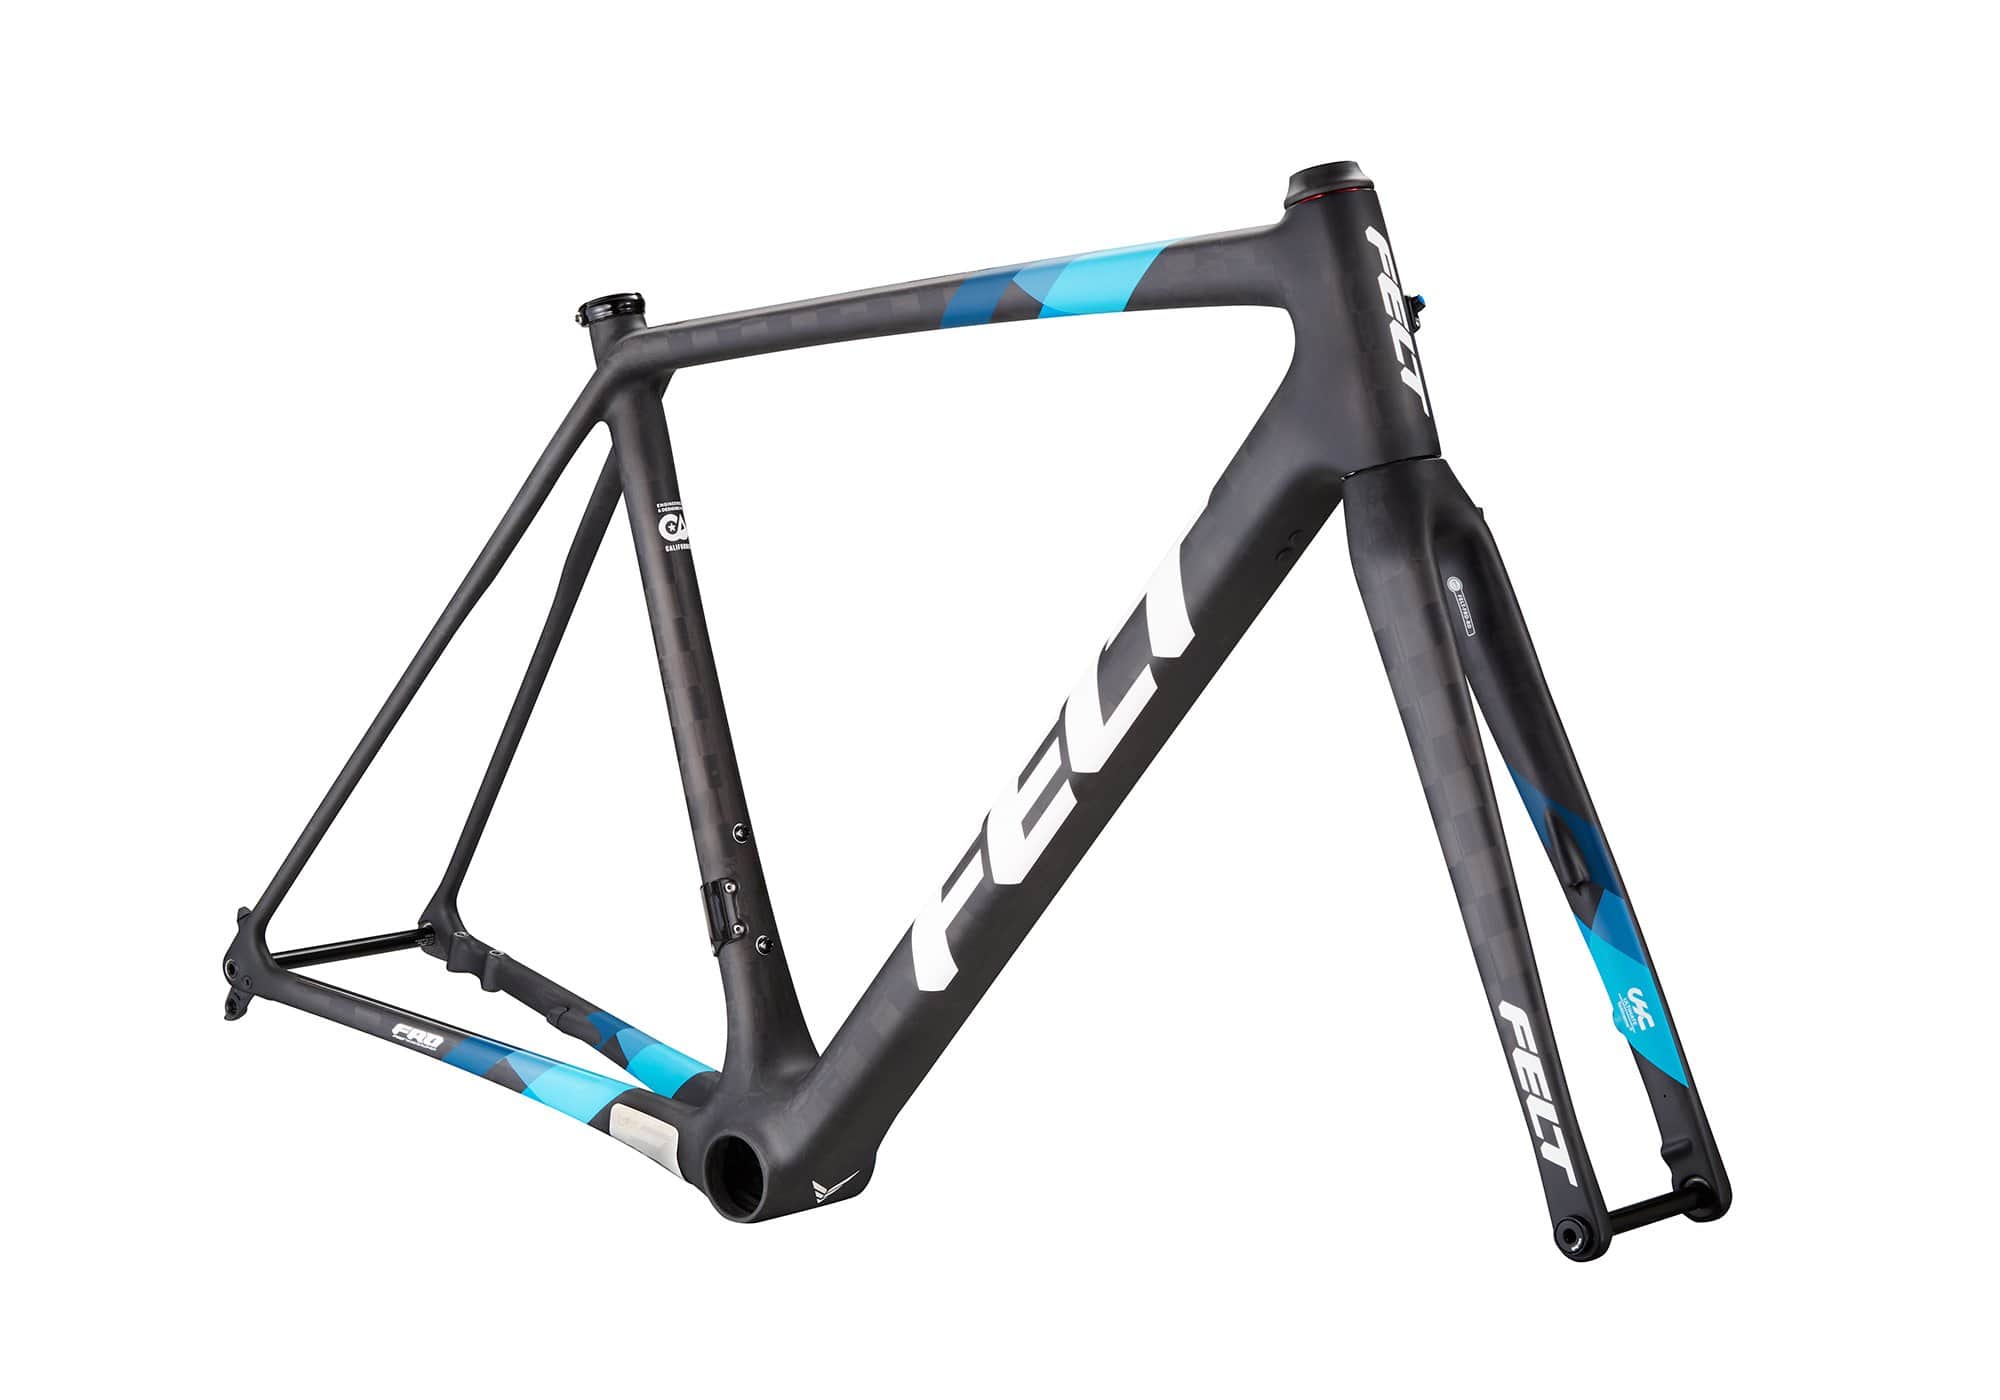 Frame of fr frd ultimate dura-ace di2